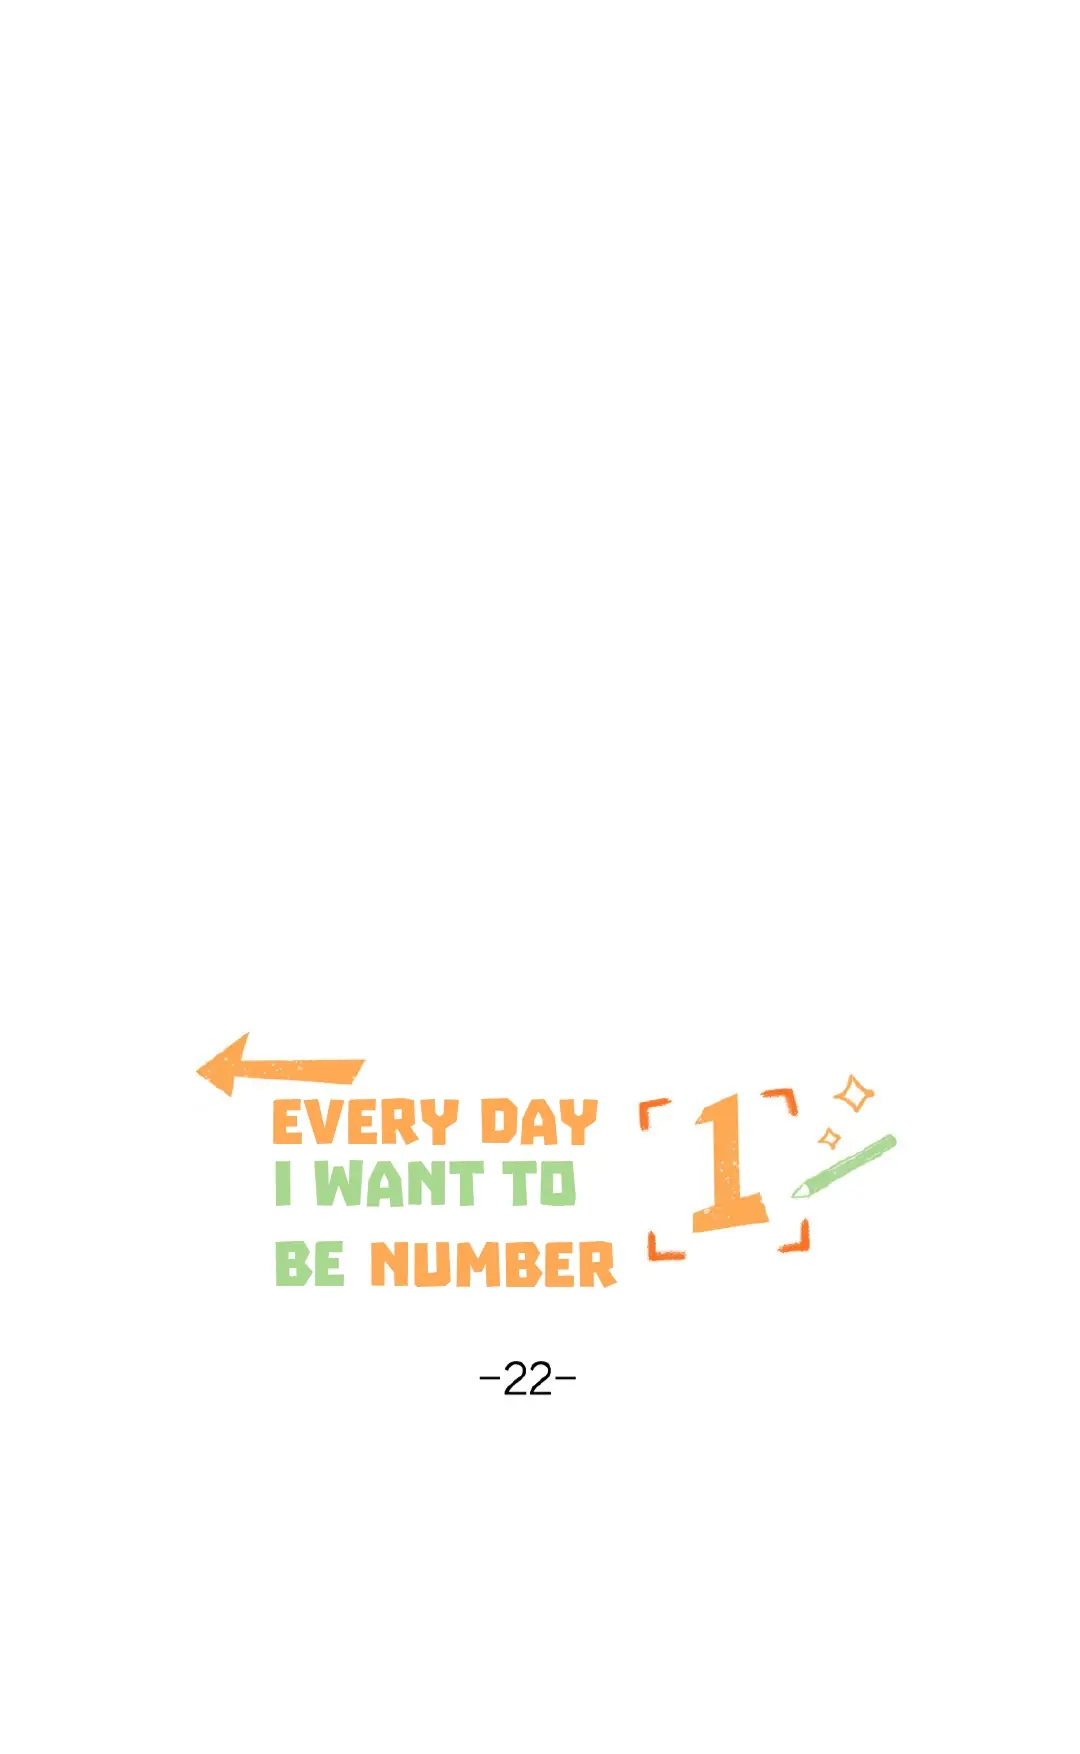 Every Day I Want To Be Number 1 - Page 3